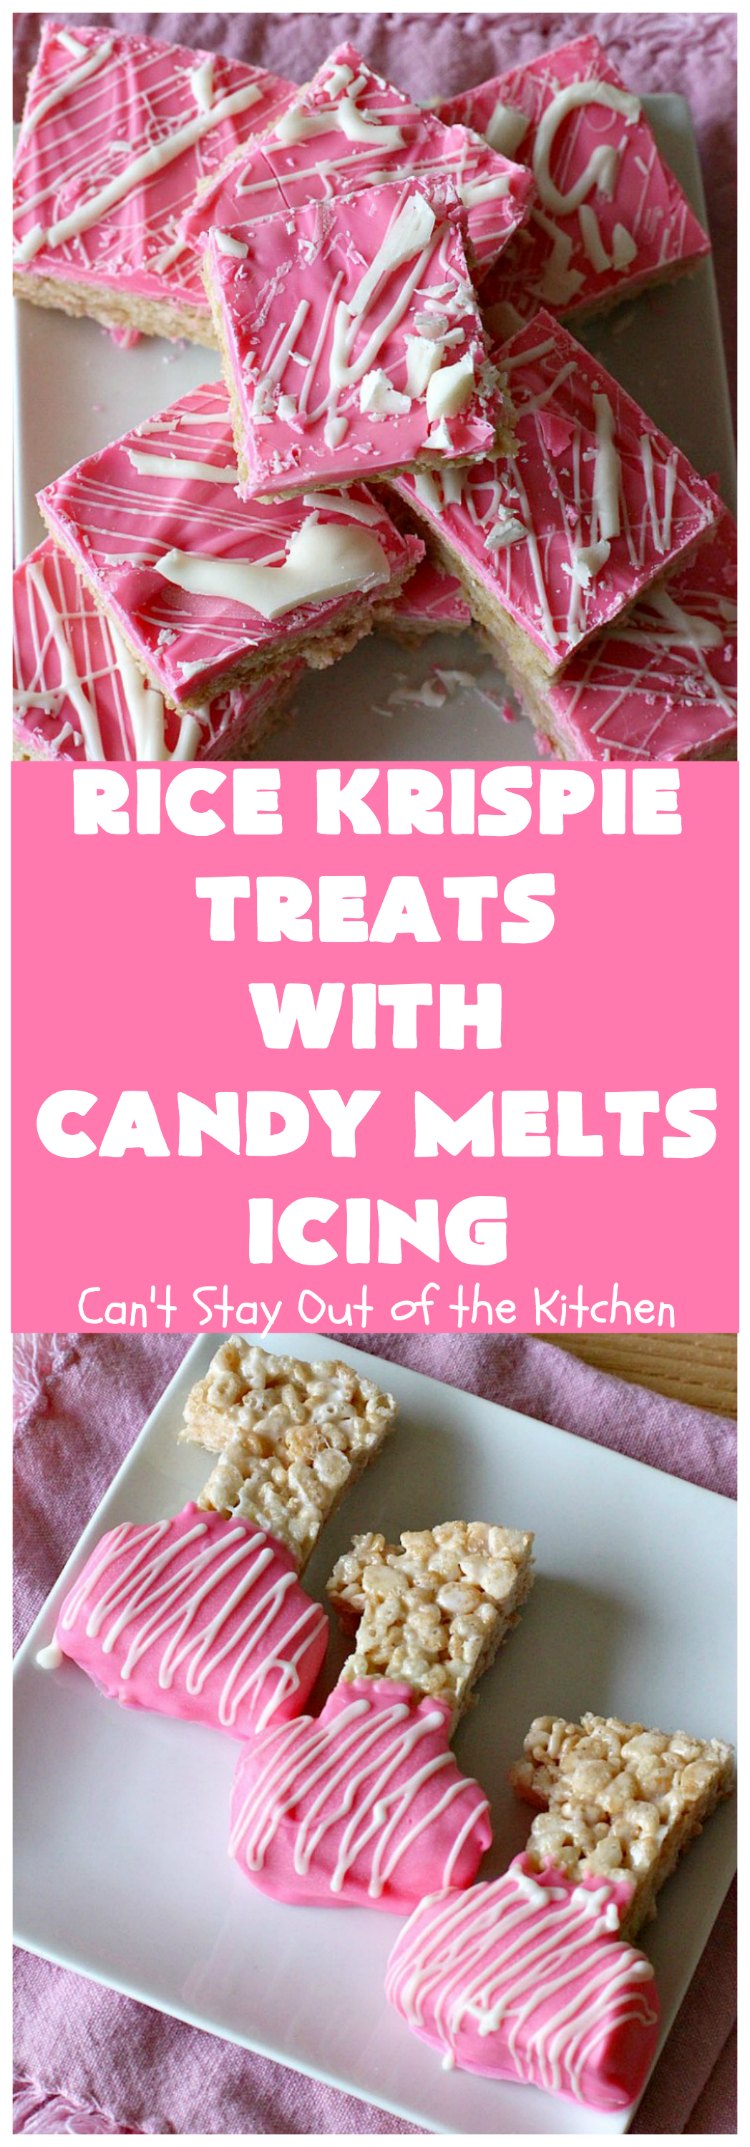 Rice Krispie Treats with Candy Melts Icing | Can't Stay Out of the Kitchen